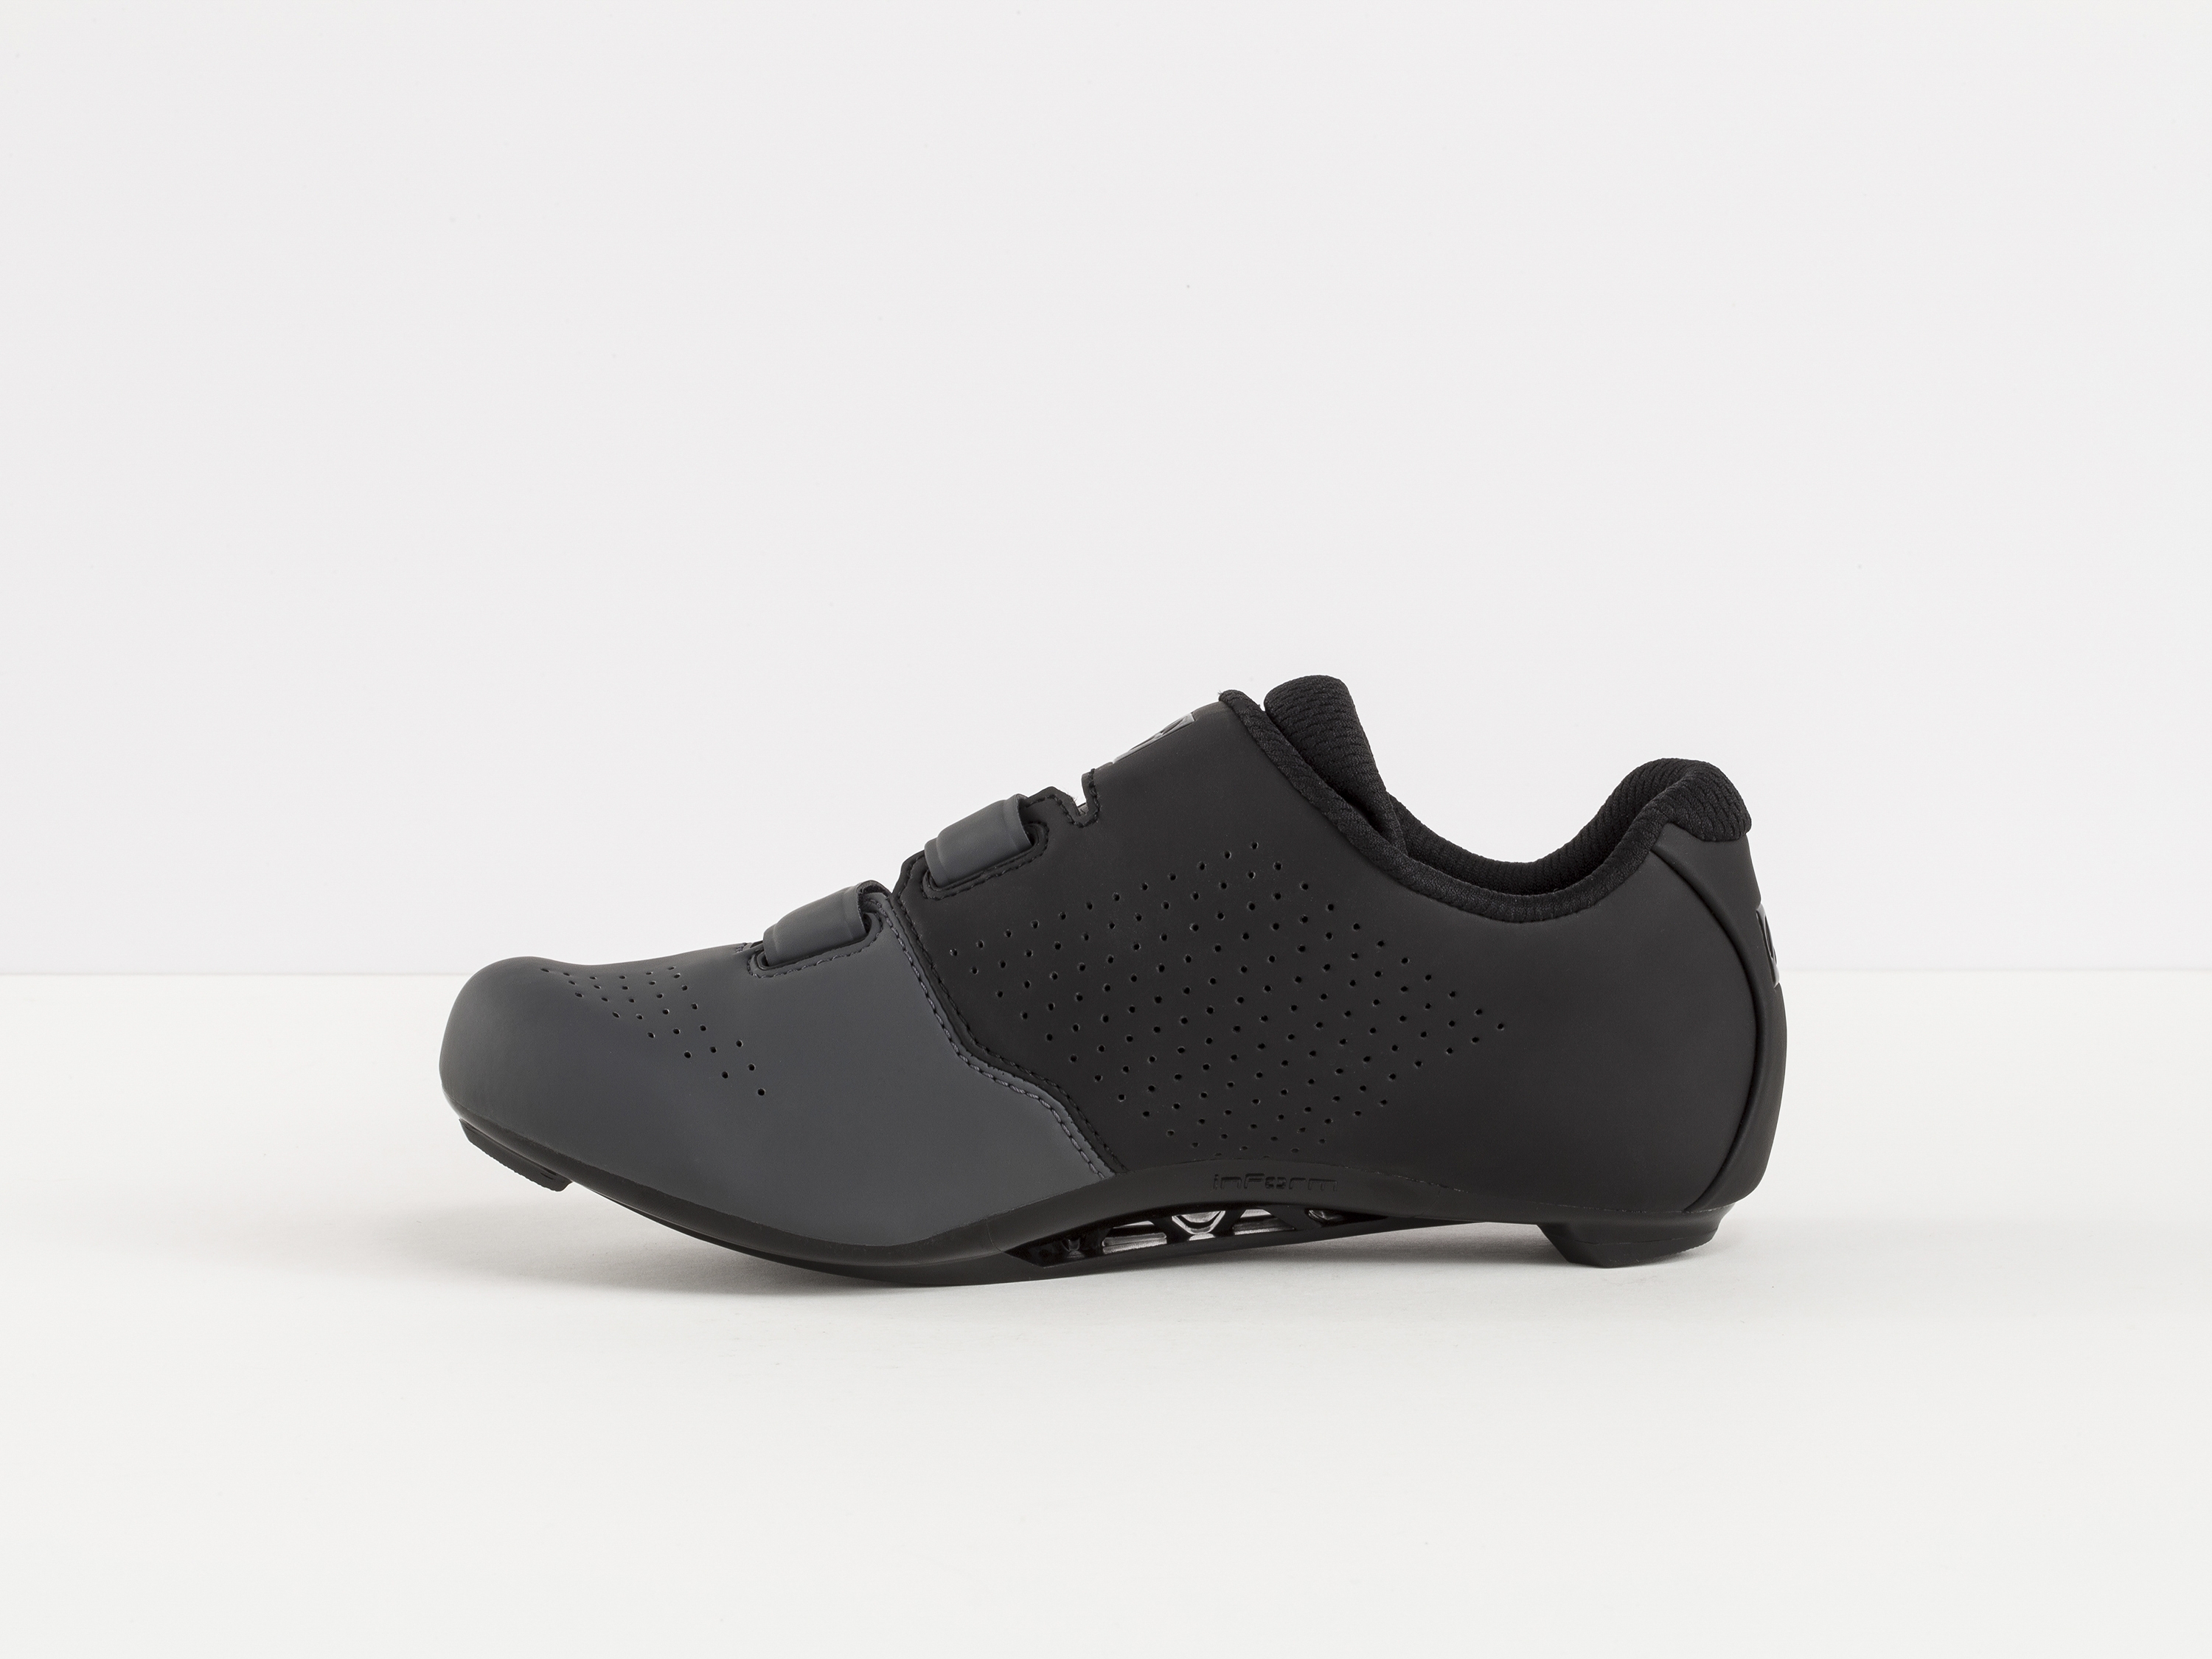 Chaussure route Femme Bontrager Vostra 